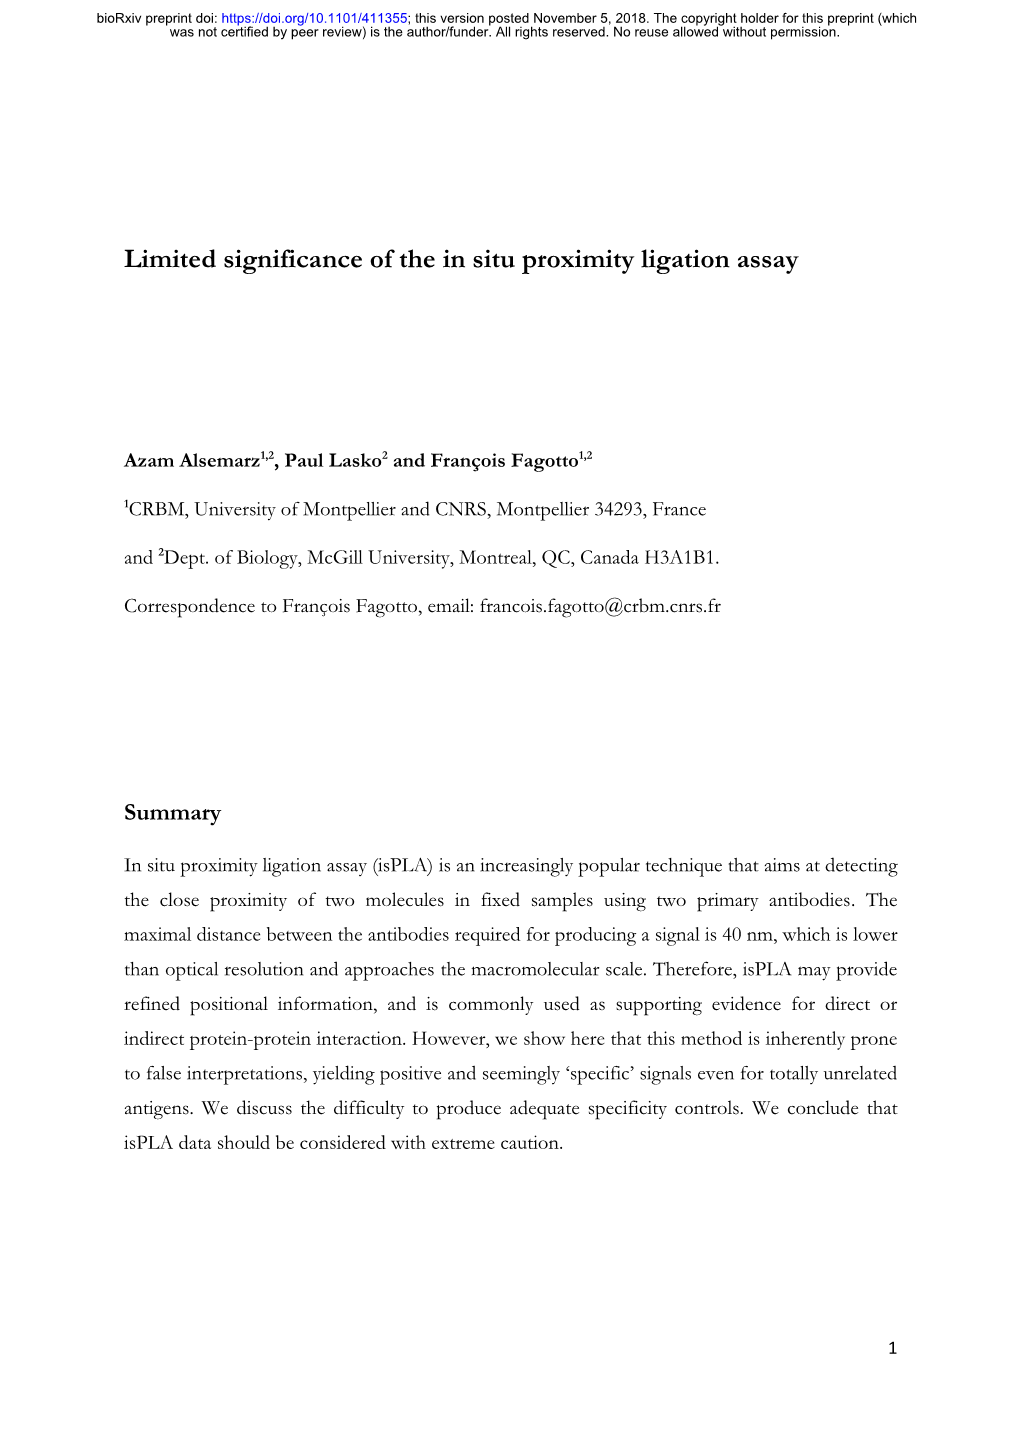 Limited Significance of the in Situ Proximity Ligation Assay